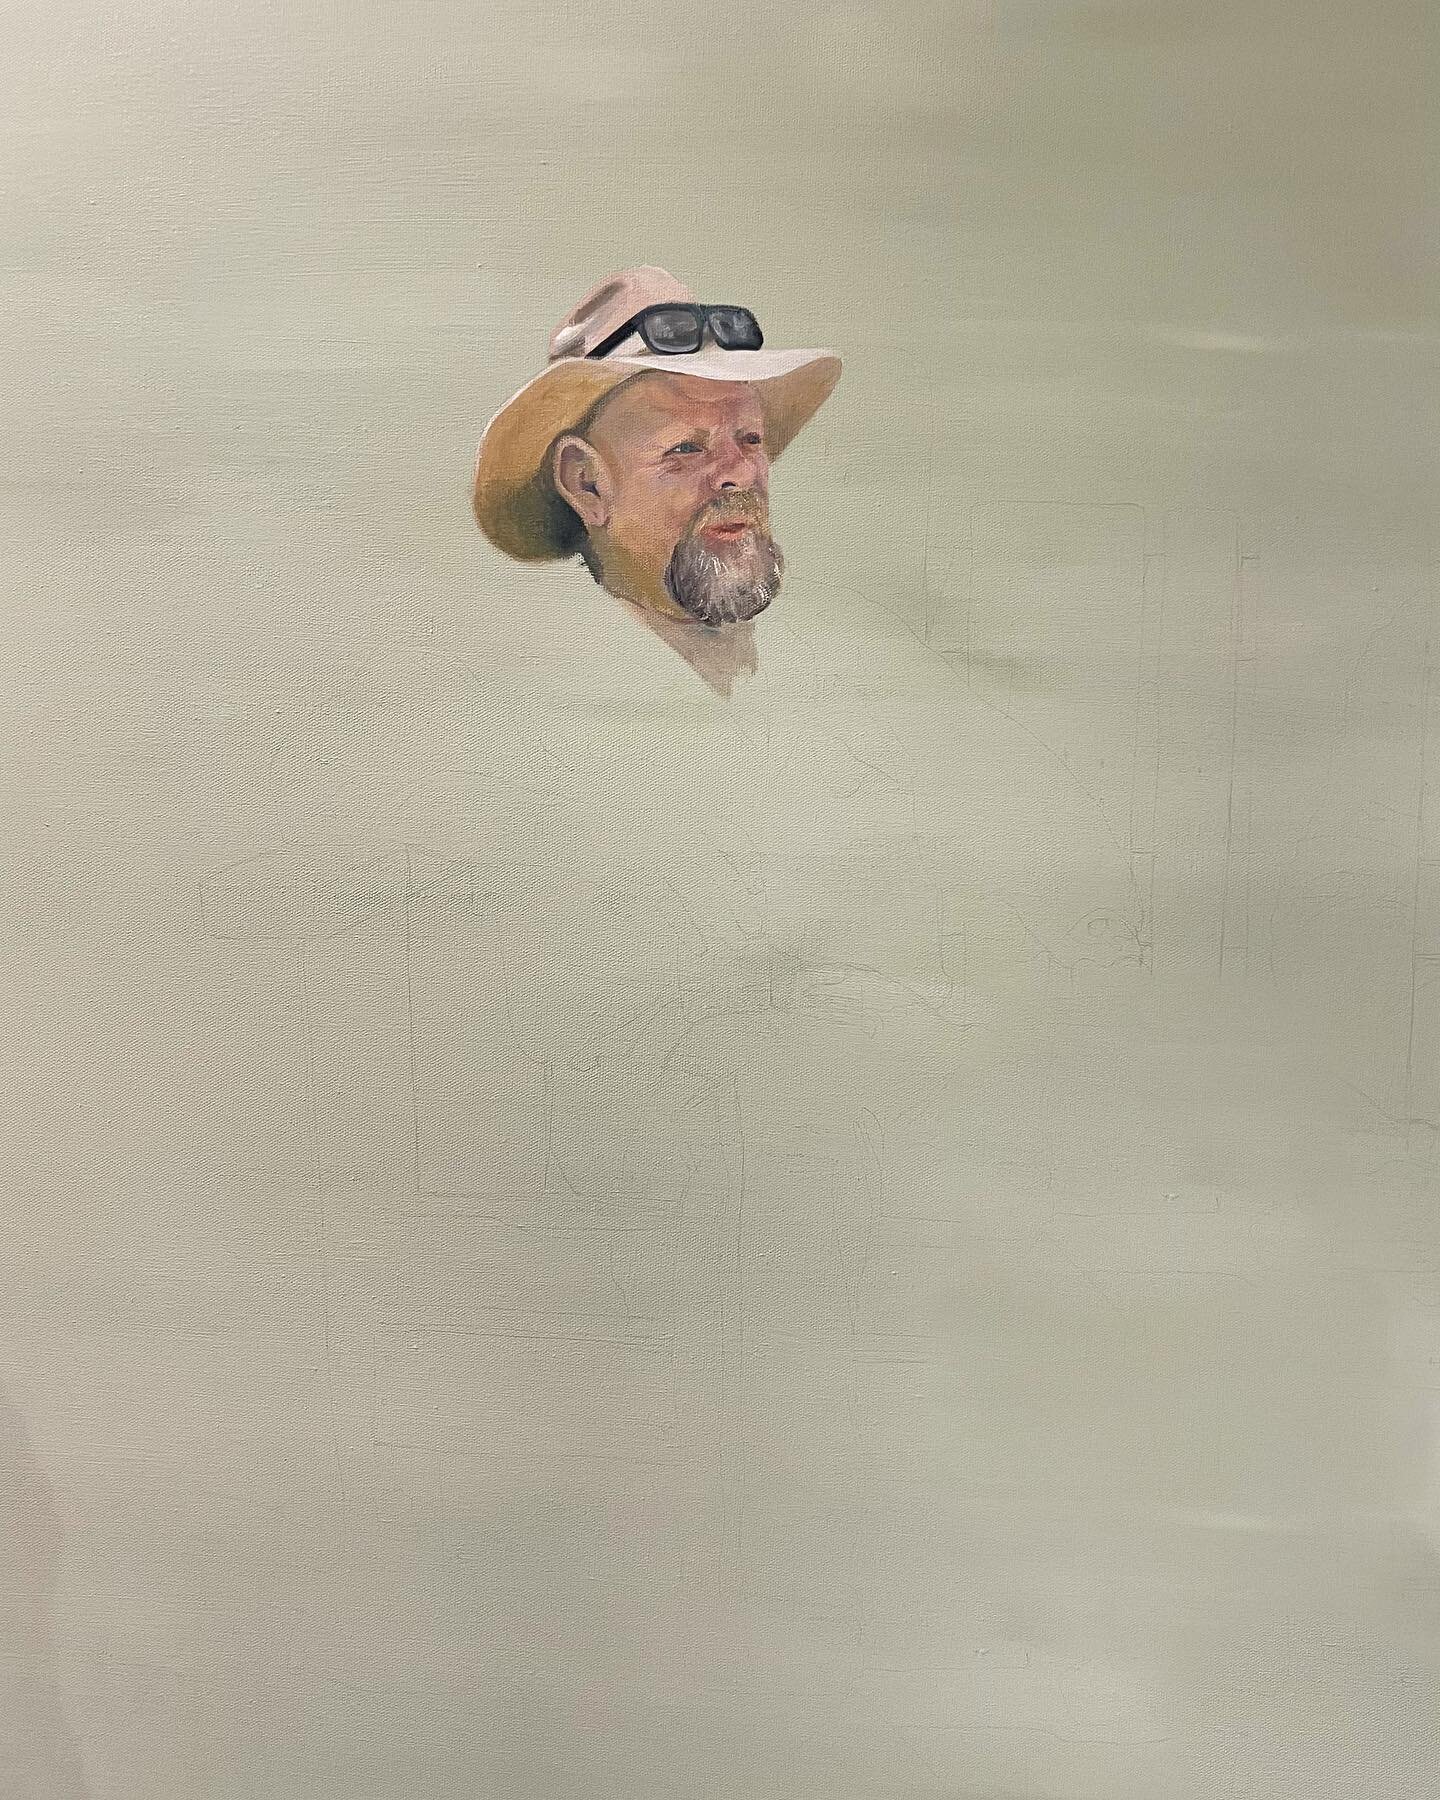 Got a head start on @wheresmacca before I go back to school next week 😎

At 91 x 121cm, this will be the largest canvas I&rsquo;ve ever painted!

#archibald #archibaldprize #portrait #painting #portraitpainting #realism #macca #wheresmacca #whatsupd